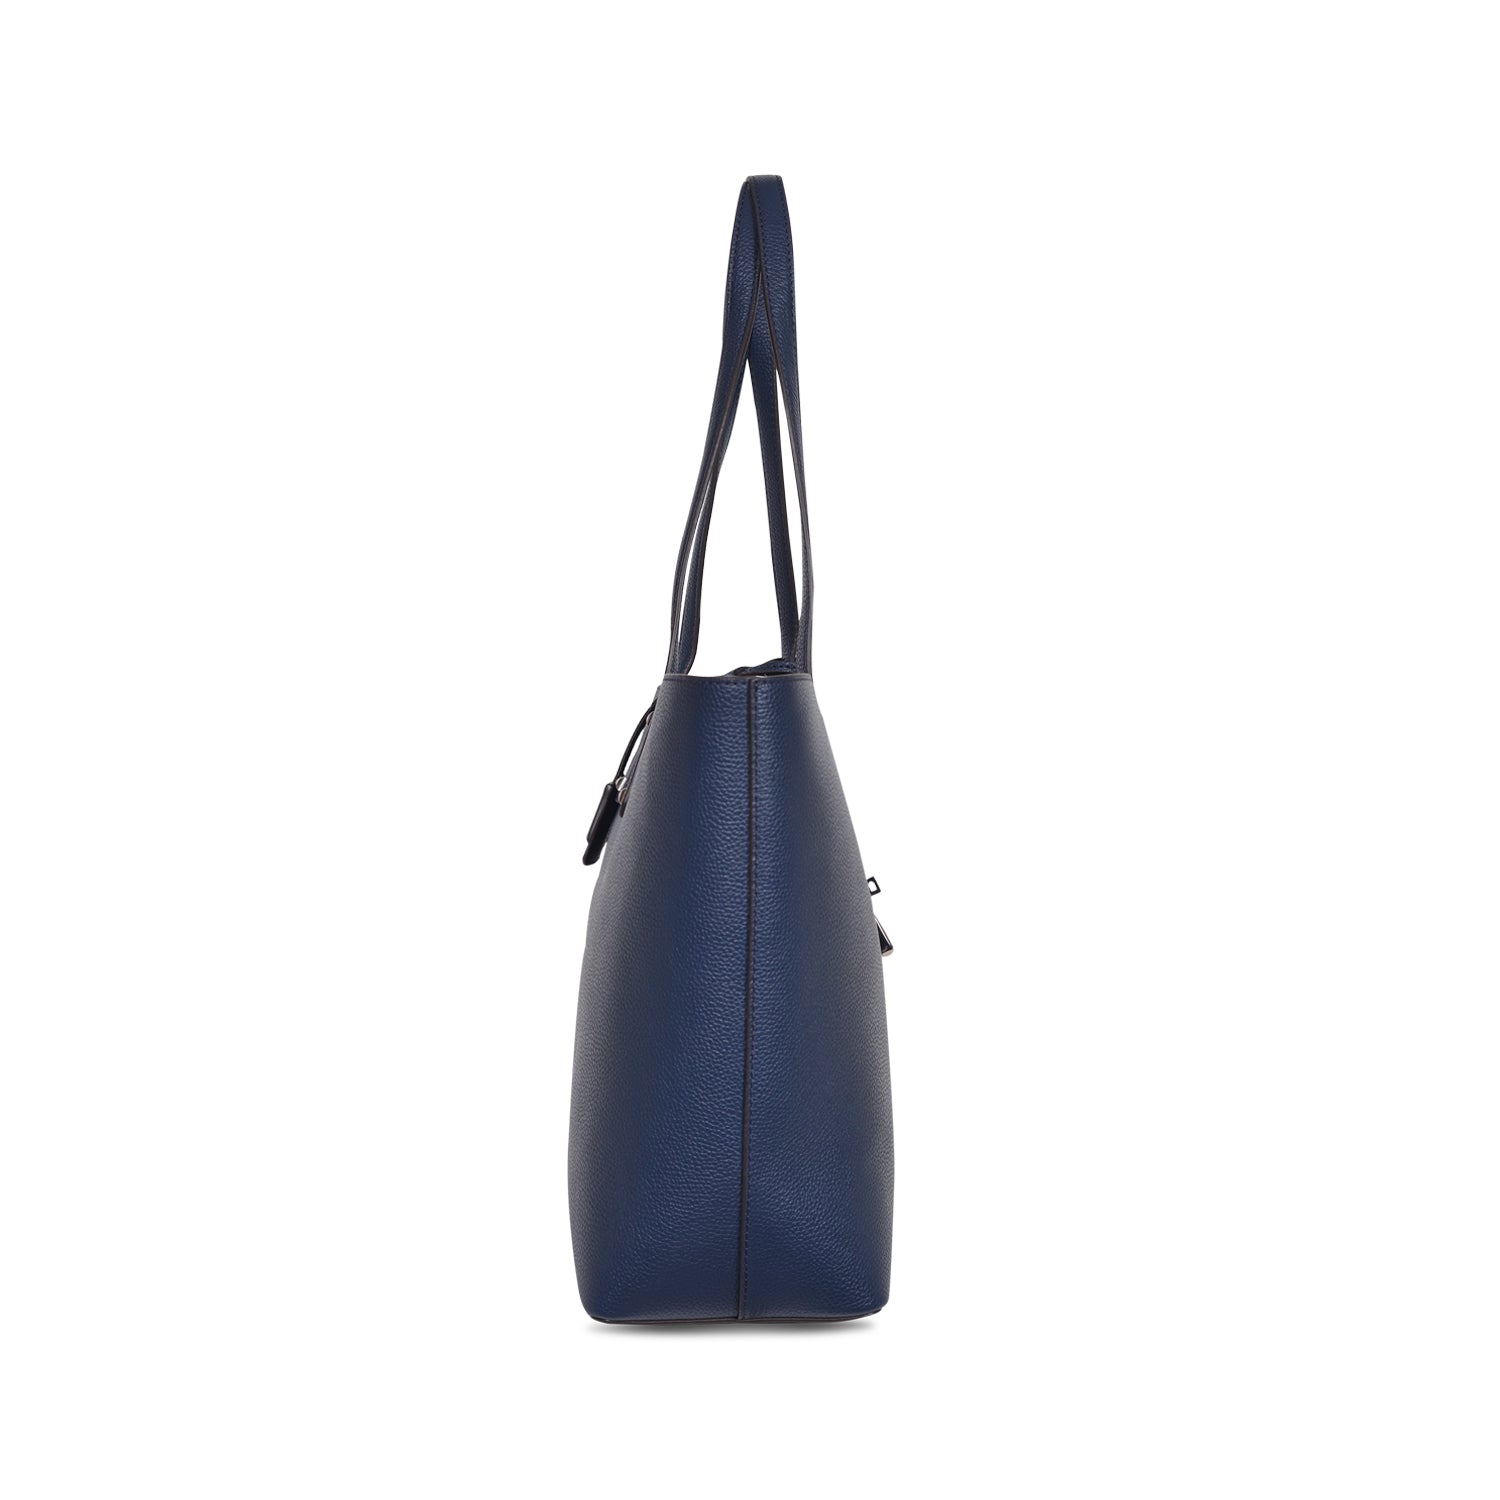 MICHAEL KORS KARSON LARGE NAVY LEATHER CARRY-ALL TOTE  BAG